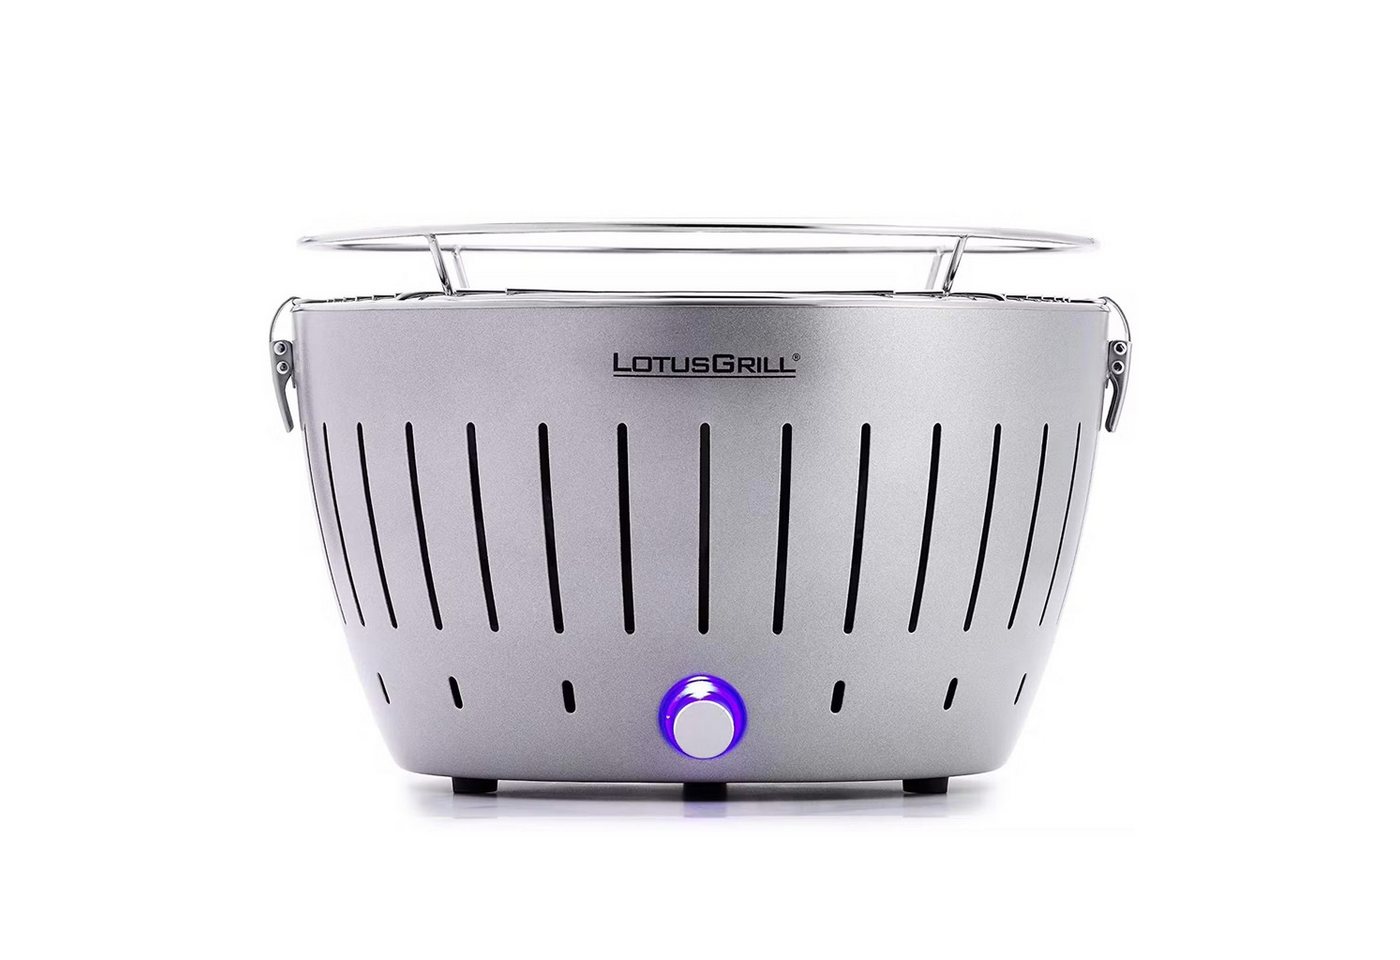 LotusGrill Holzkohlegrill LotusGrill Classic Silber Metallic G340 Holzkohlegrill Tischgrill von LotusGrill